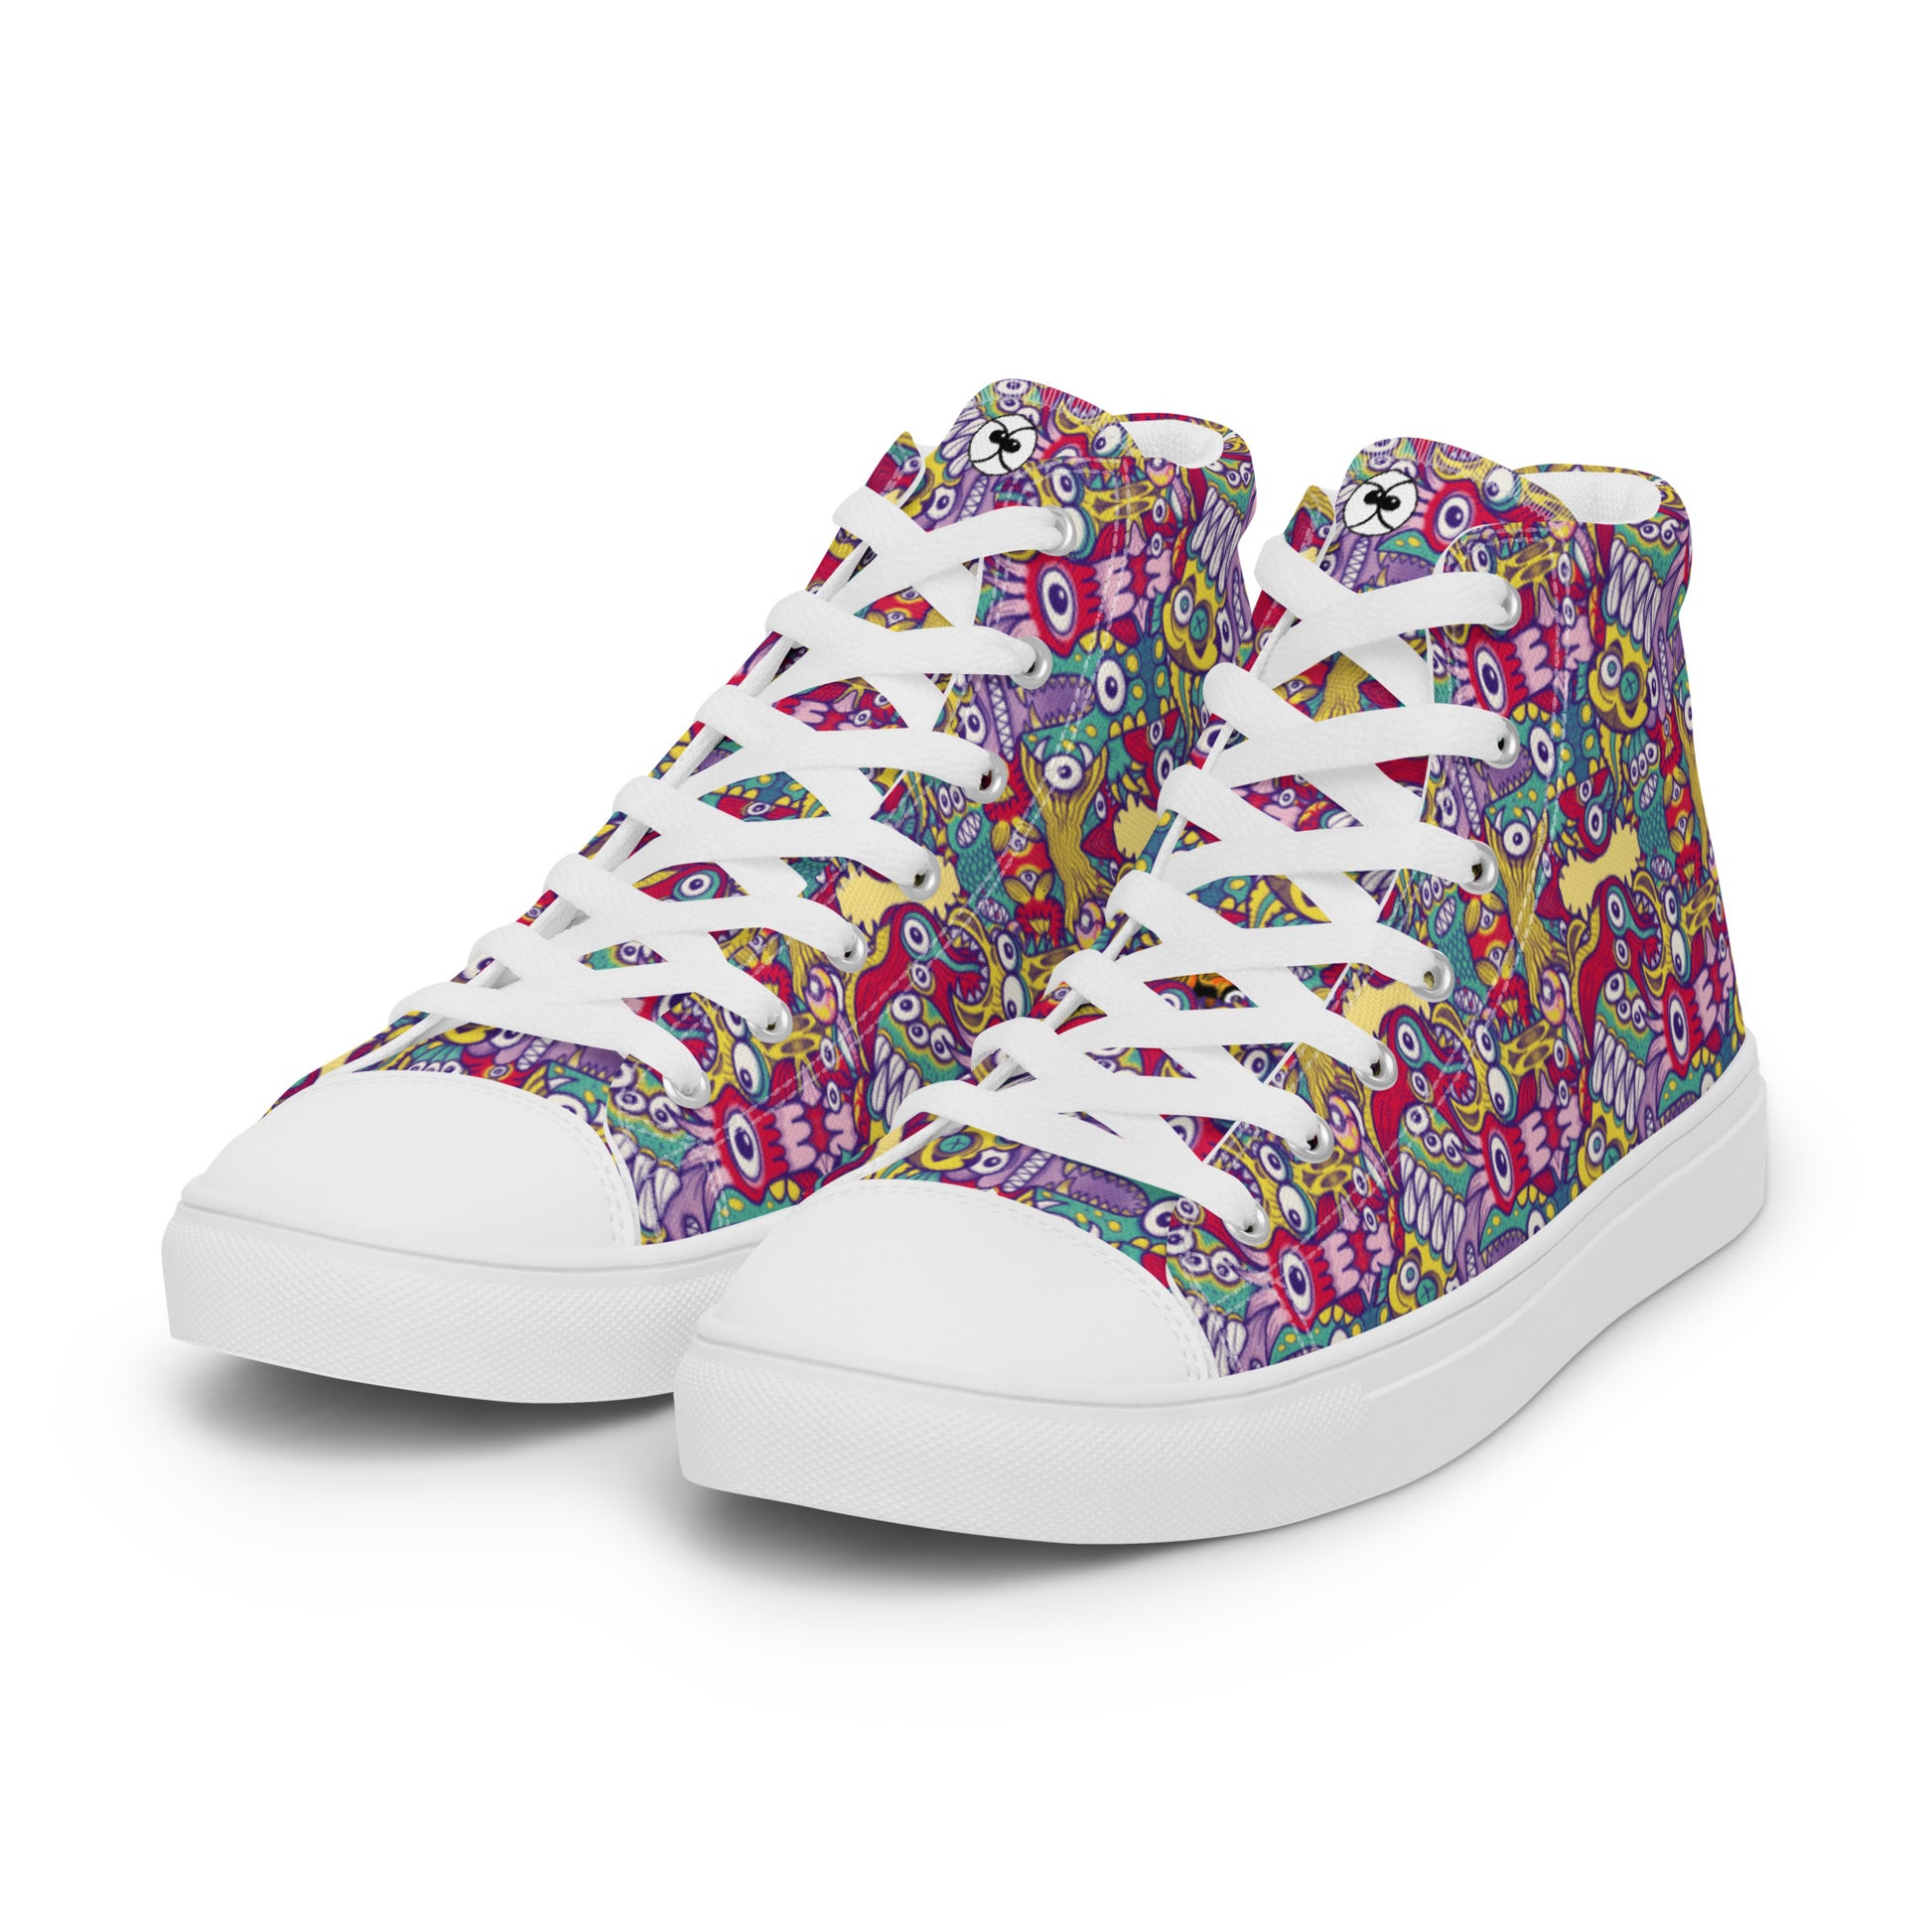 Exquisite corpse of doodles in a pattern design Men’s high top canvas shoes. Overview